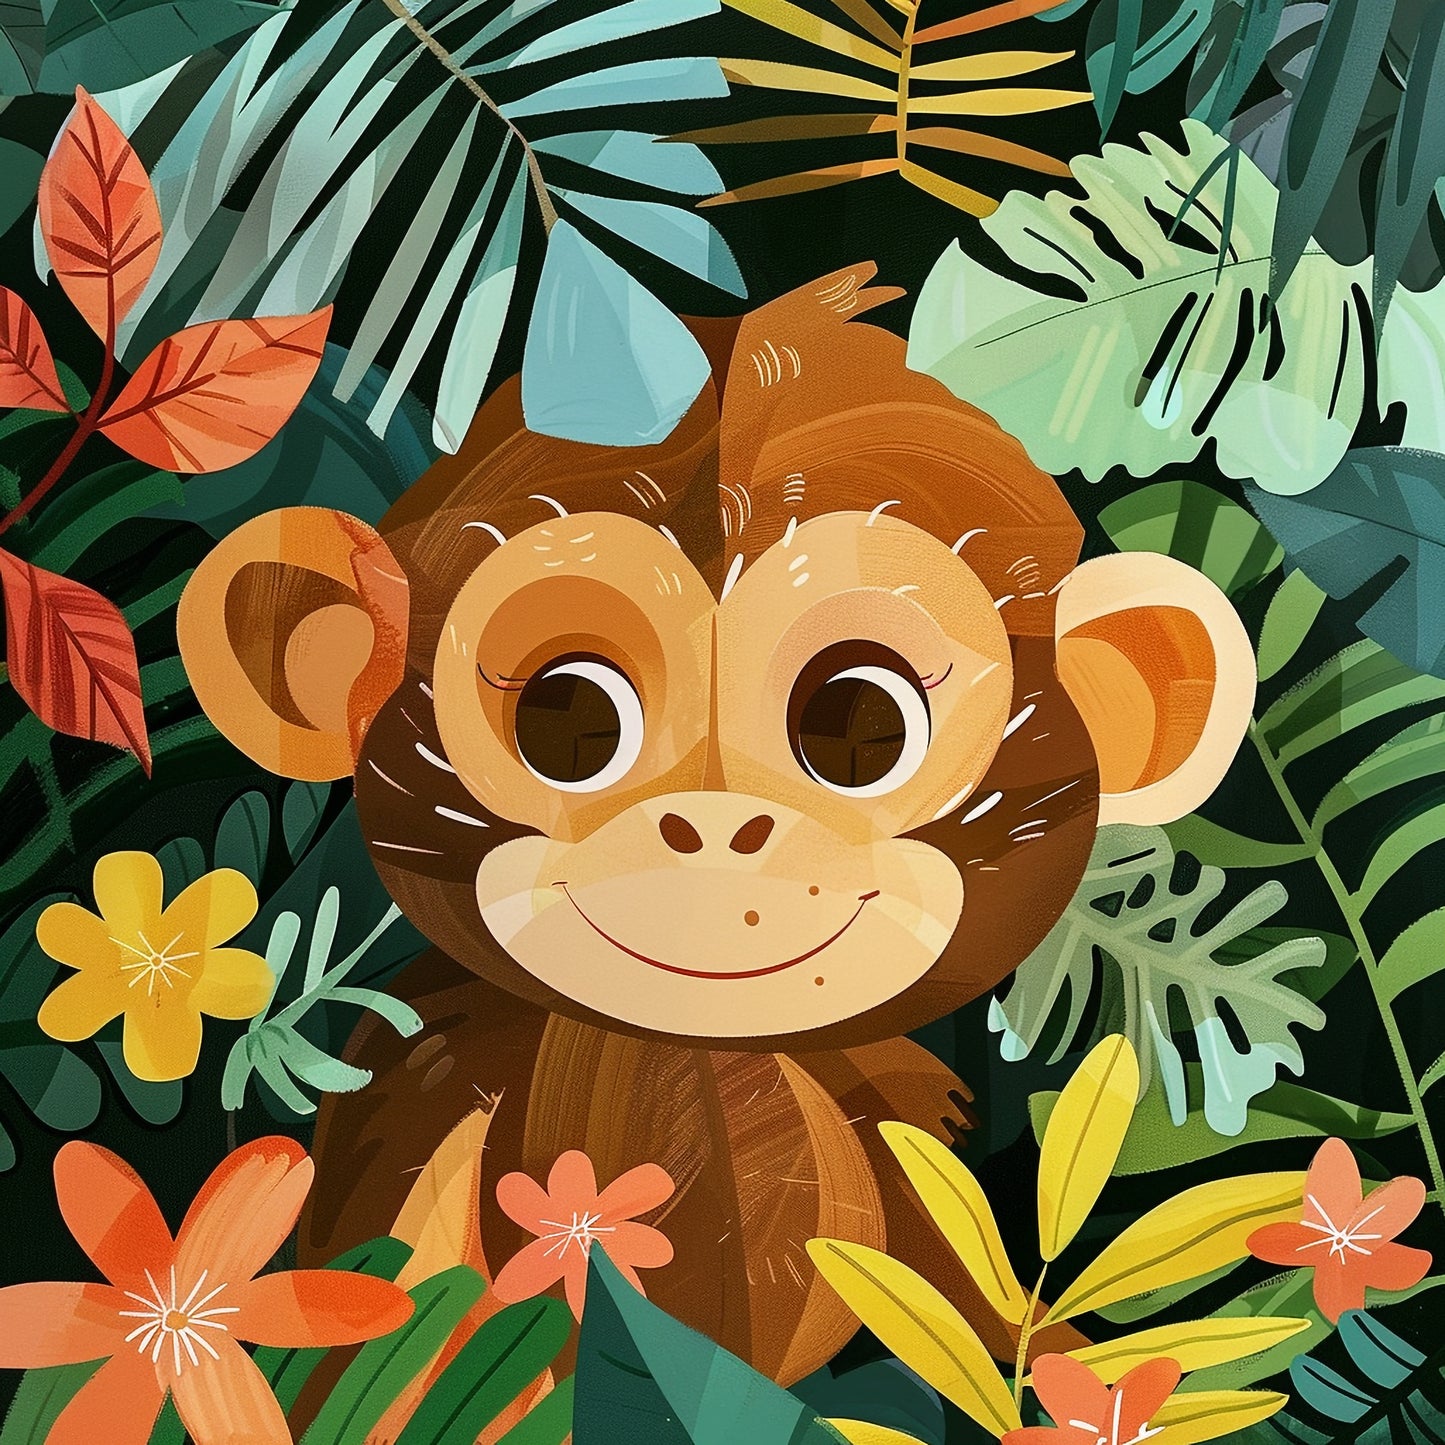 Cute Monkey Surrounded by Lush Tropical Flora